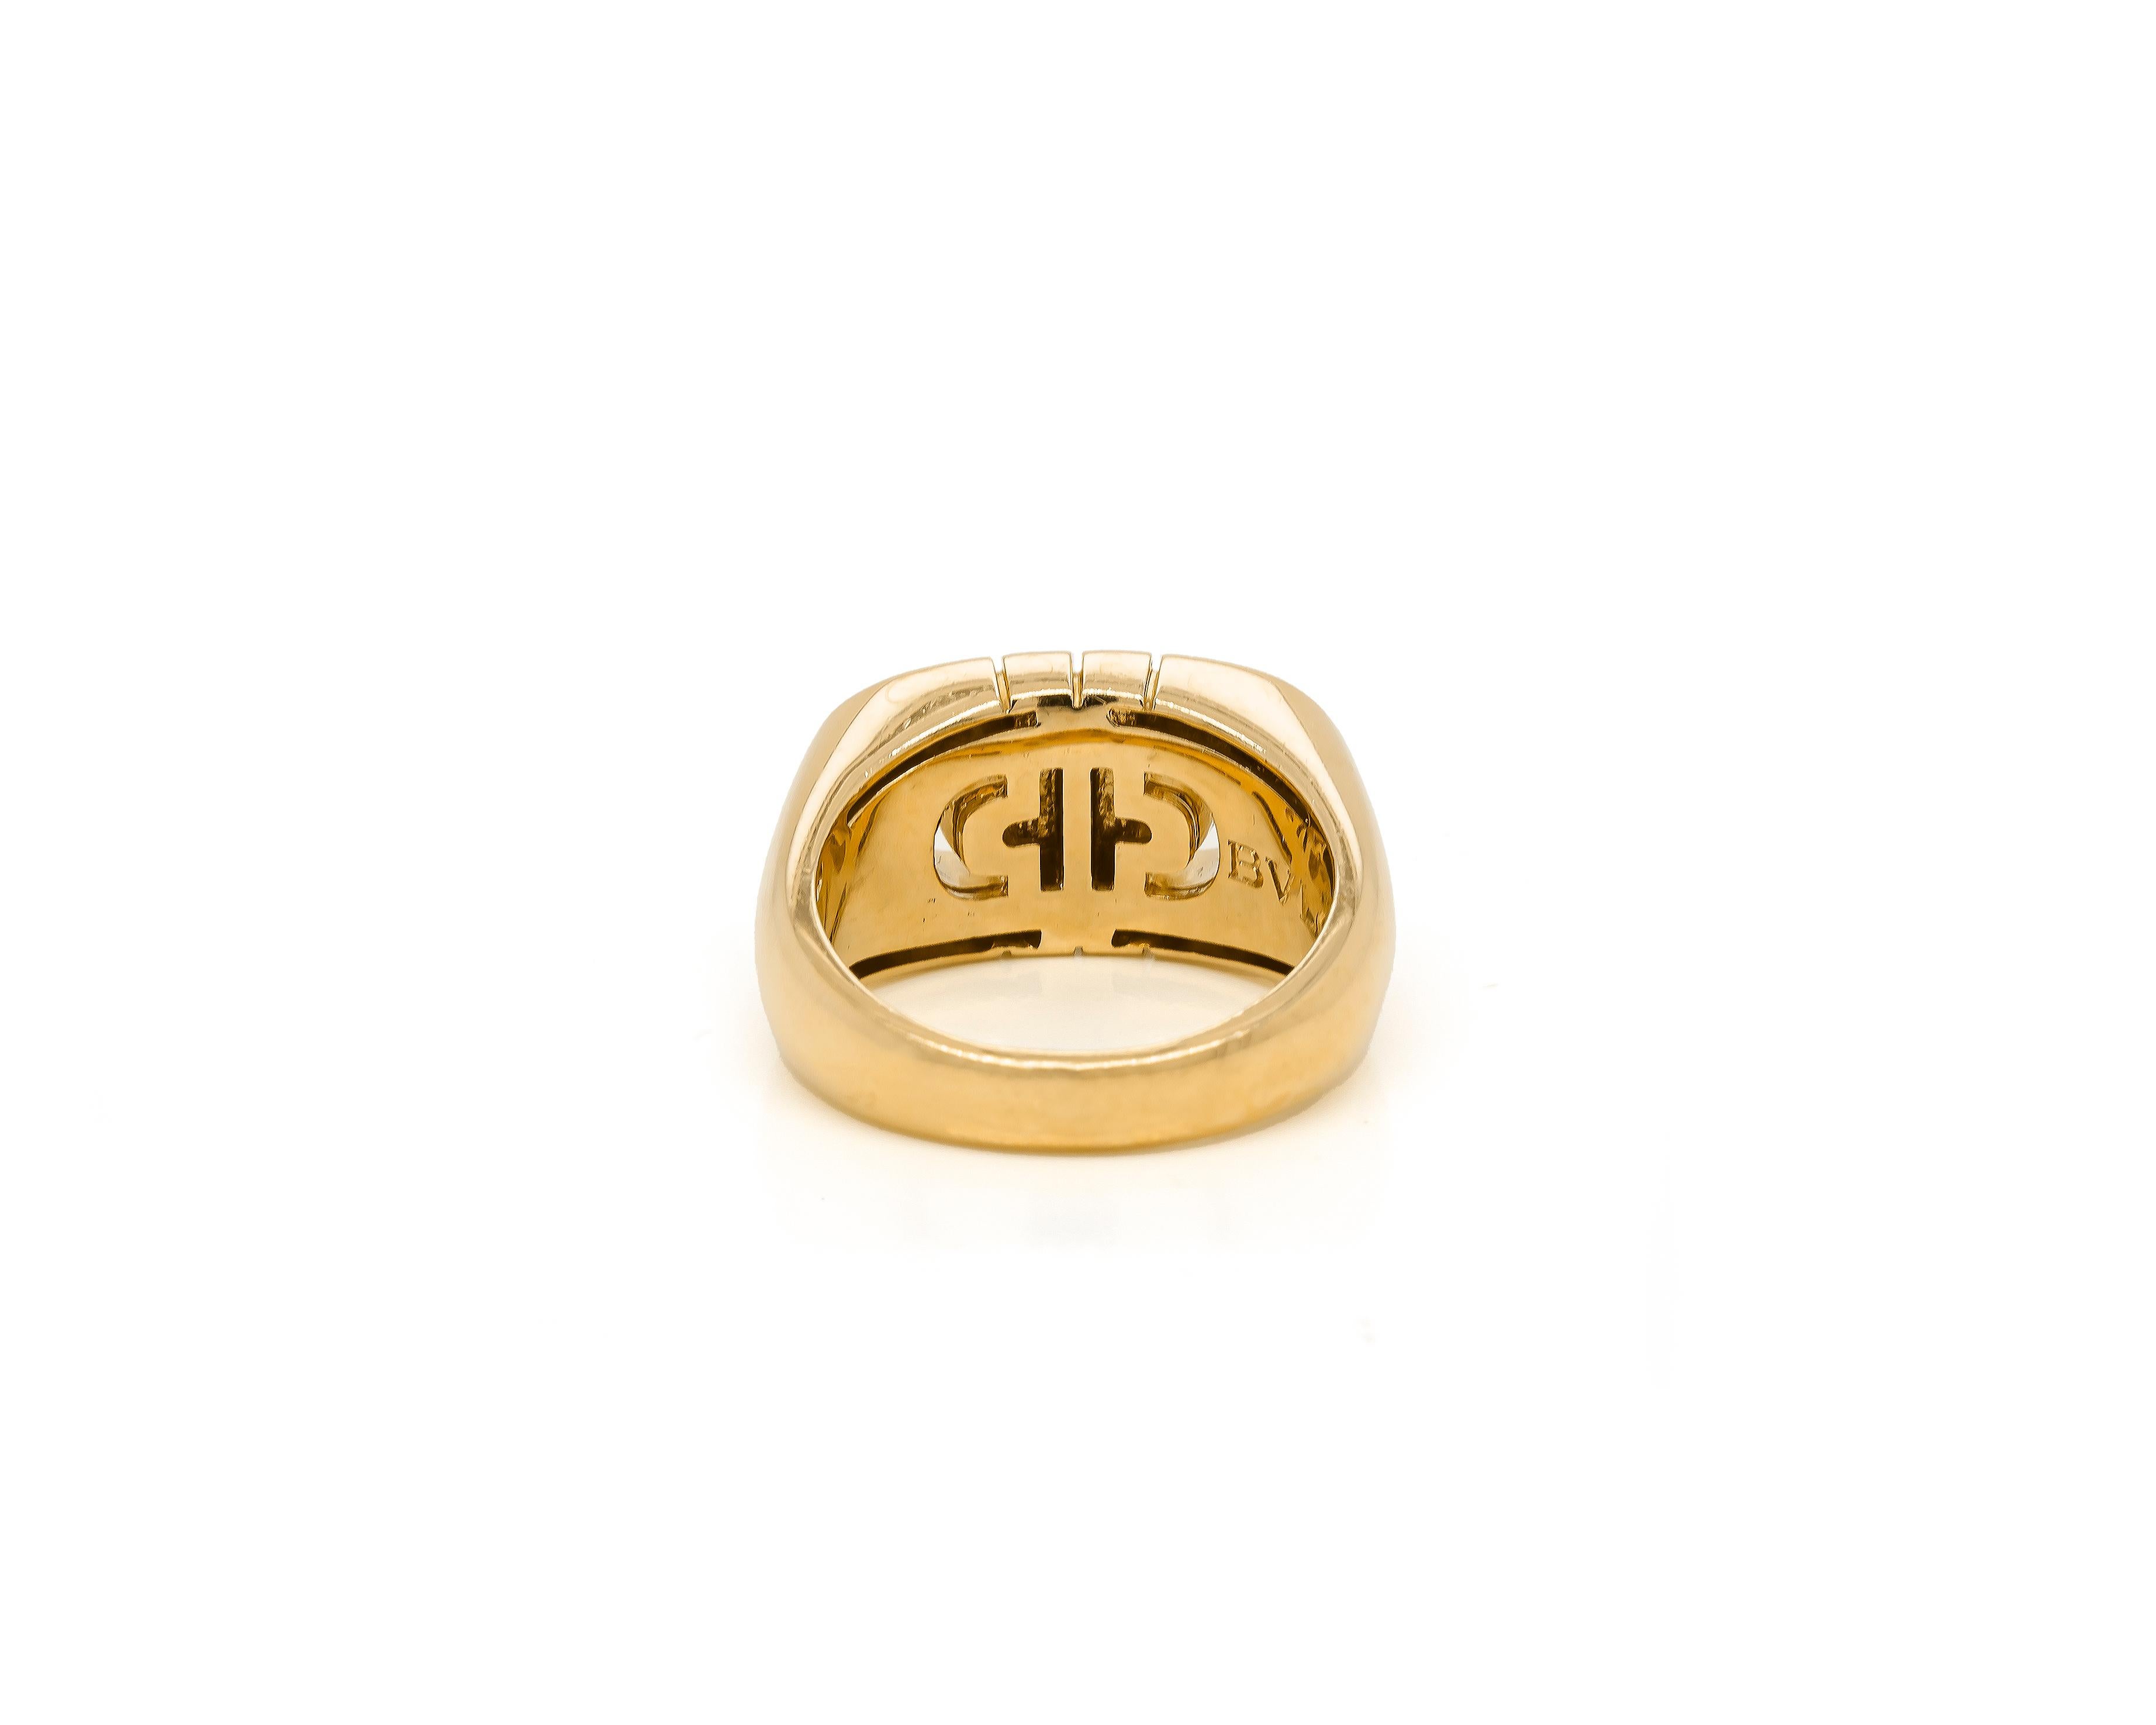 This gorgeous signet style ring by Italian luxury fashion house, Bulgari is from their iconic Parentesi collection. The ring showcases a sculpted geometric design crafted from solid high polish 18 carat yellow gold. The beautiful ring tapers from